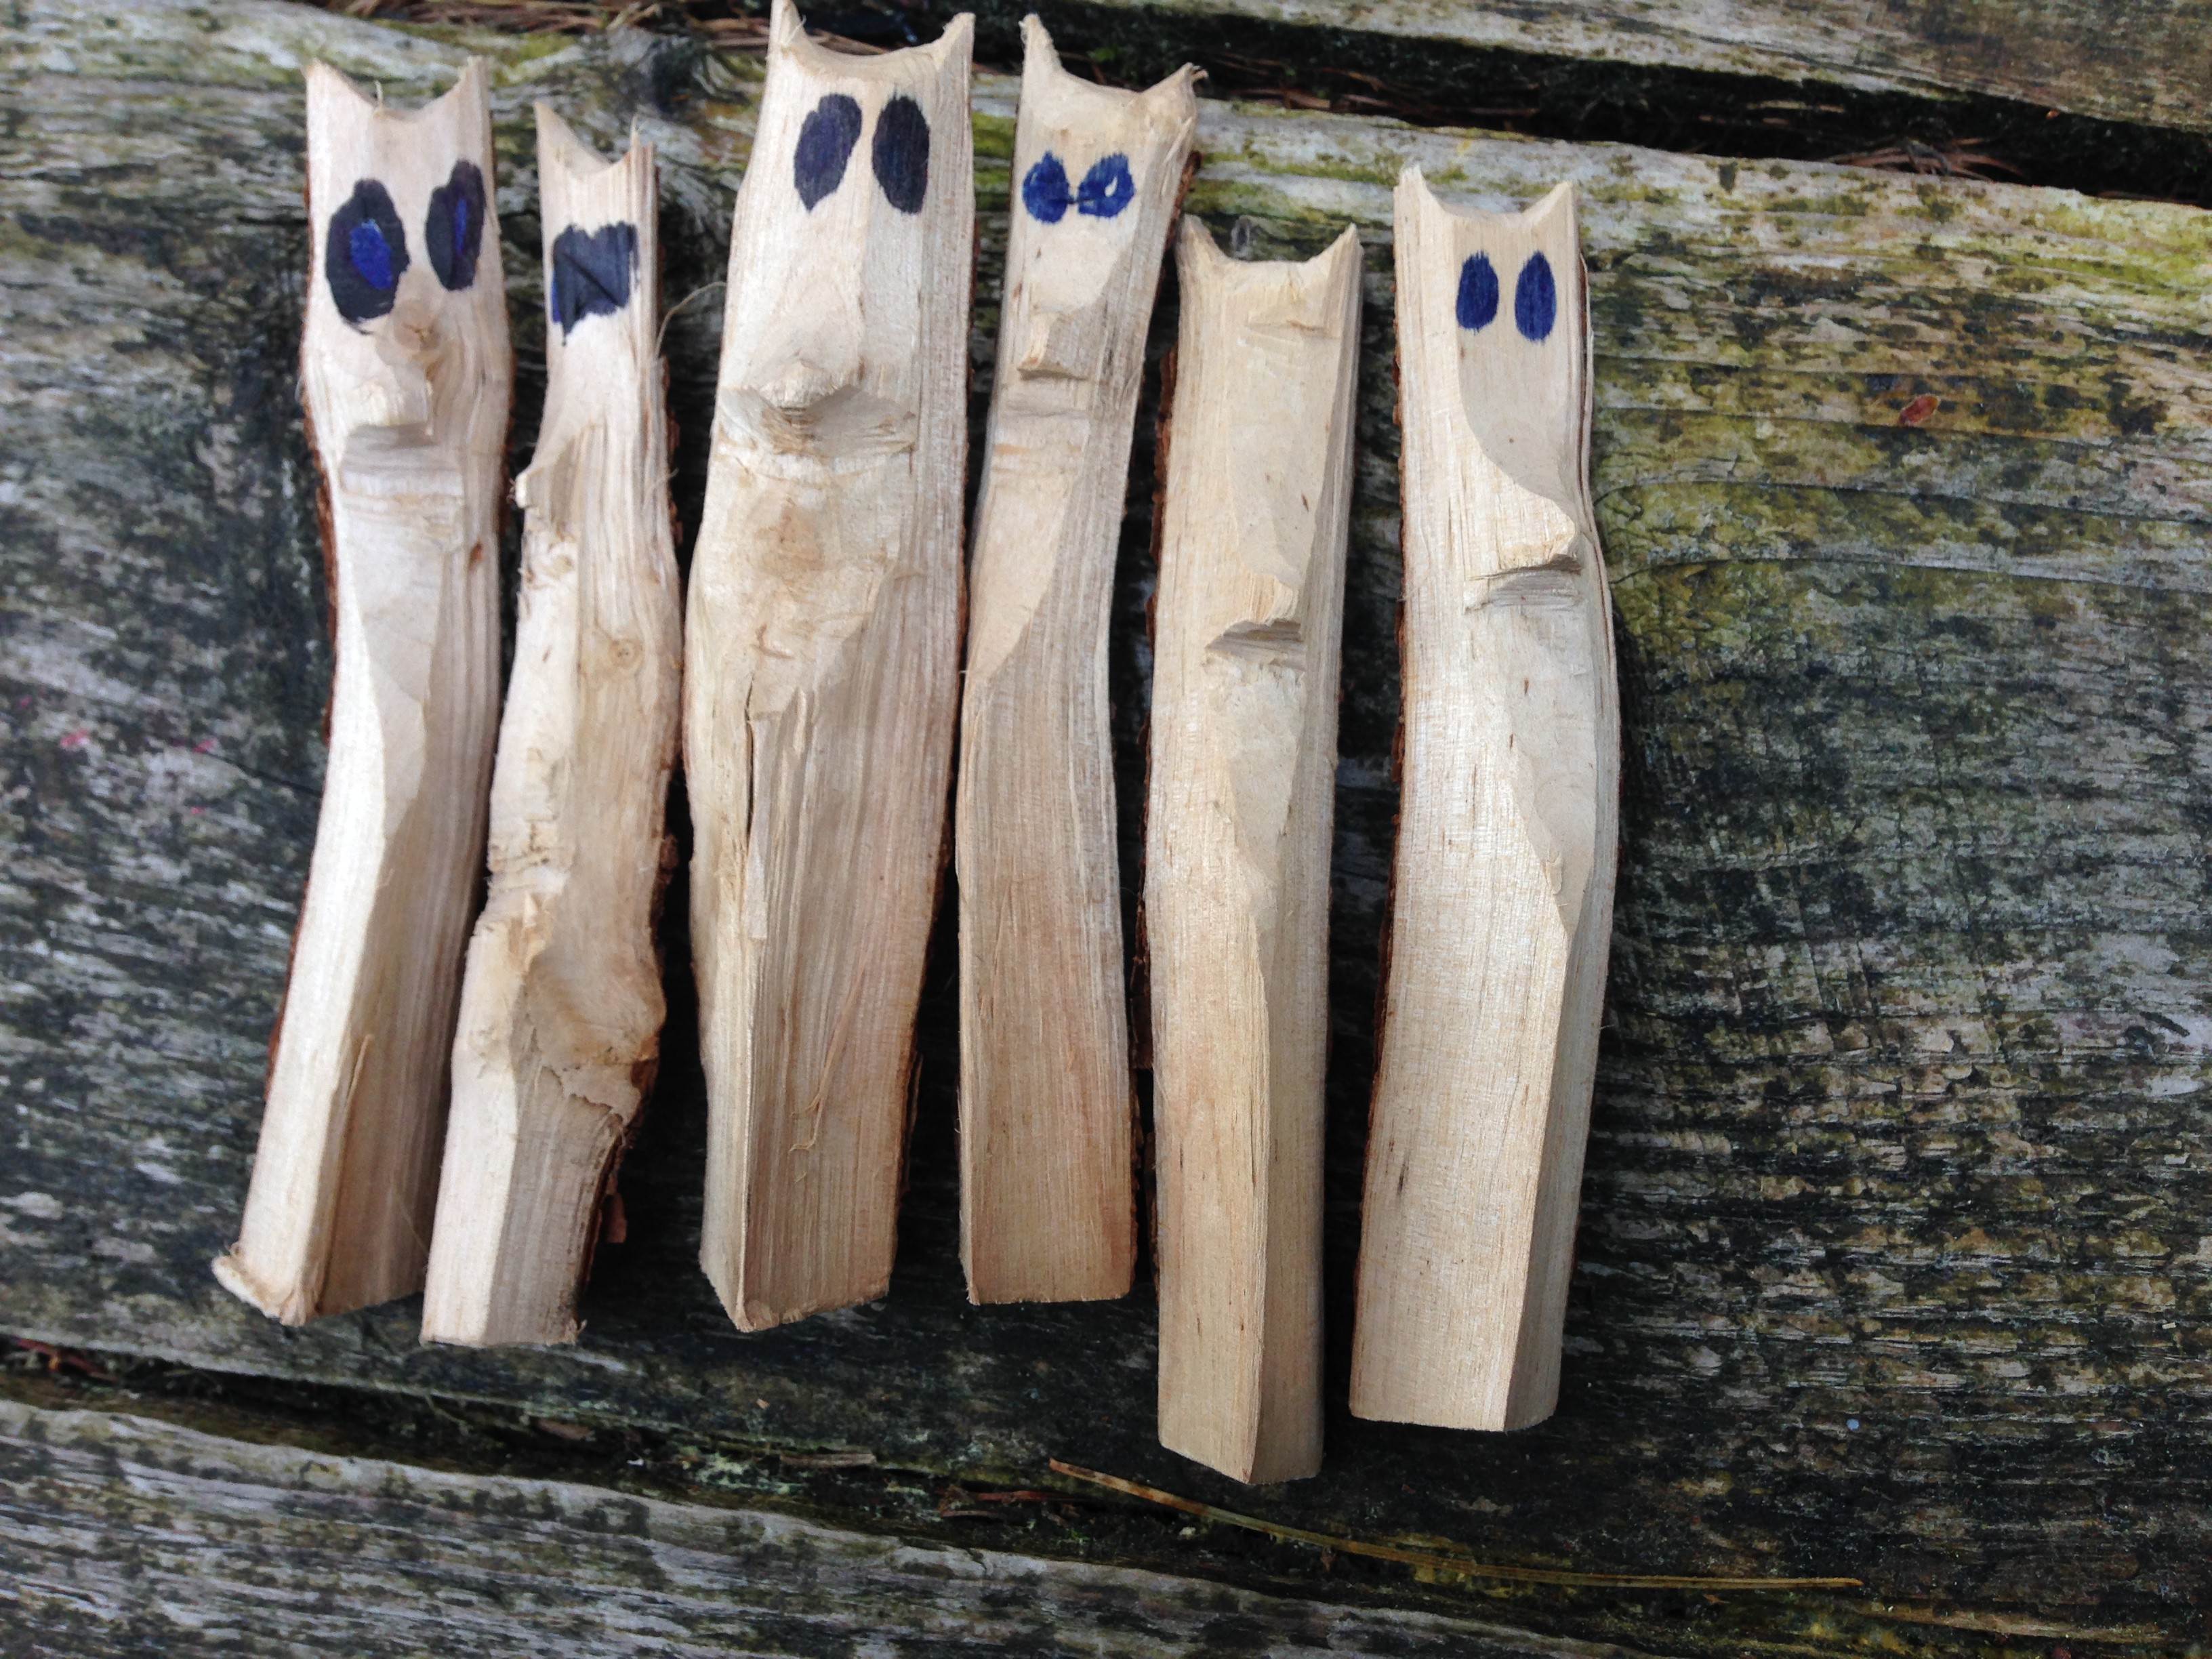 Skulk of foxes- a whittling project. - Kindling Play and Training